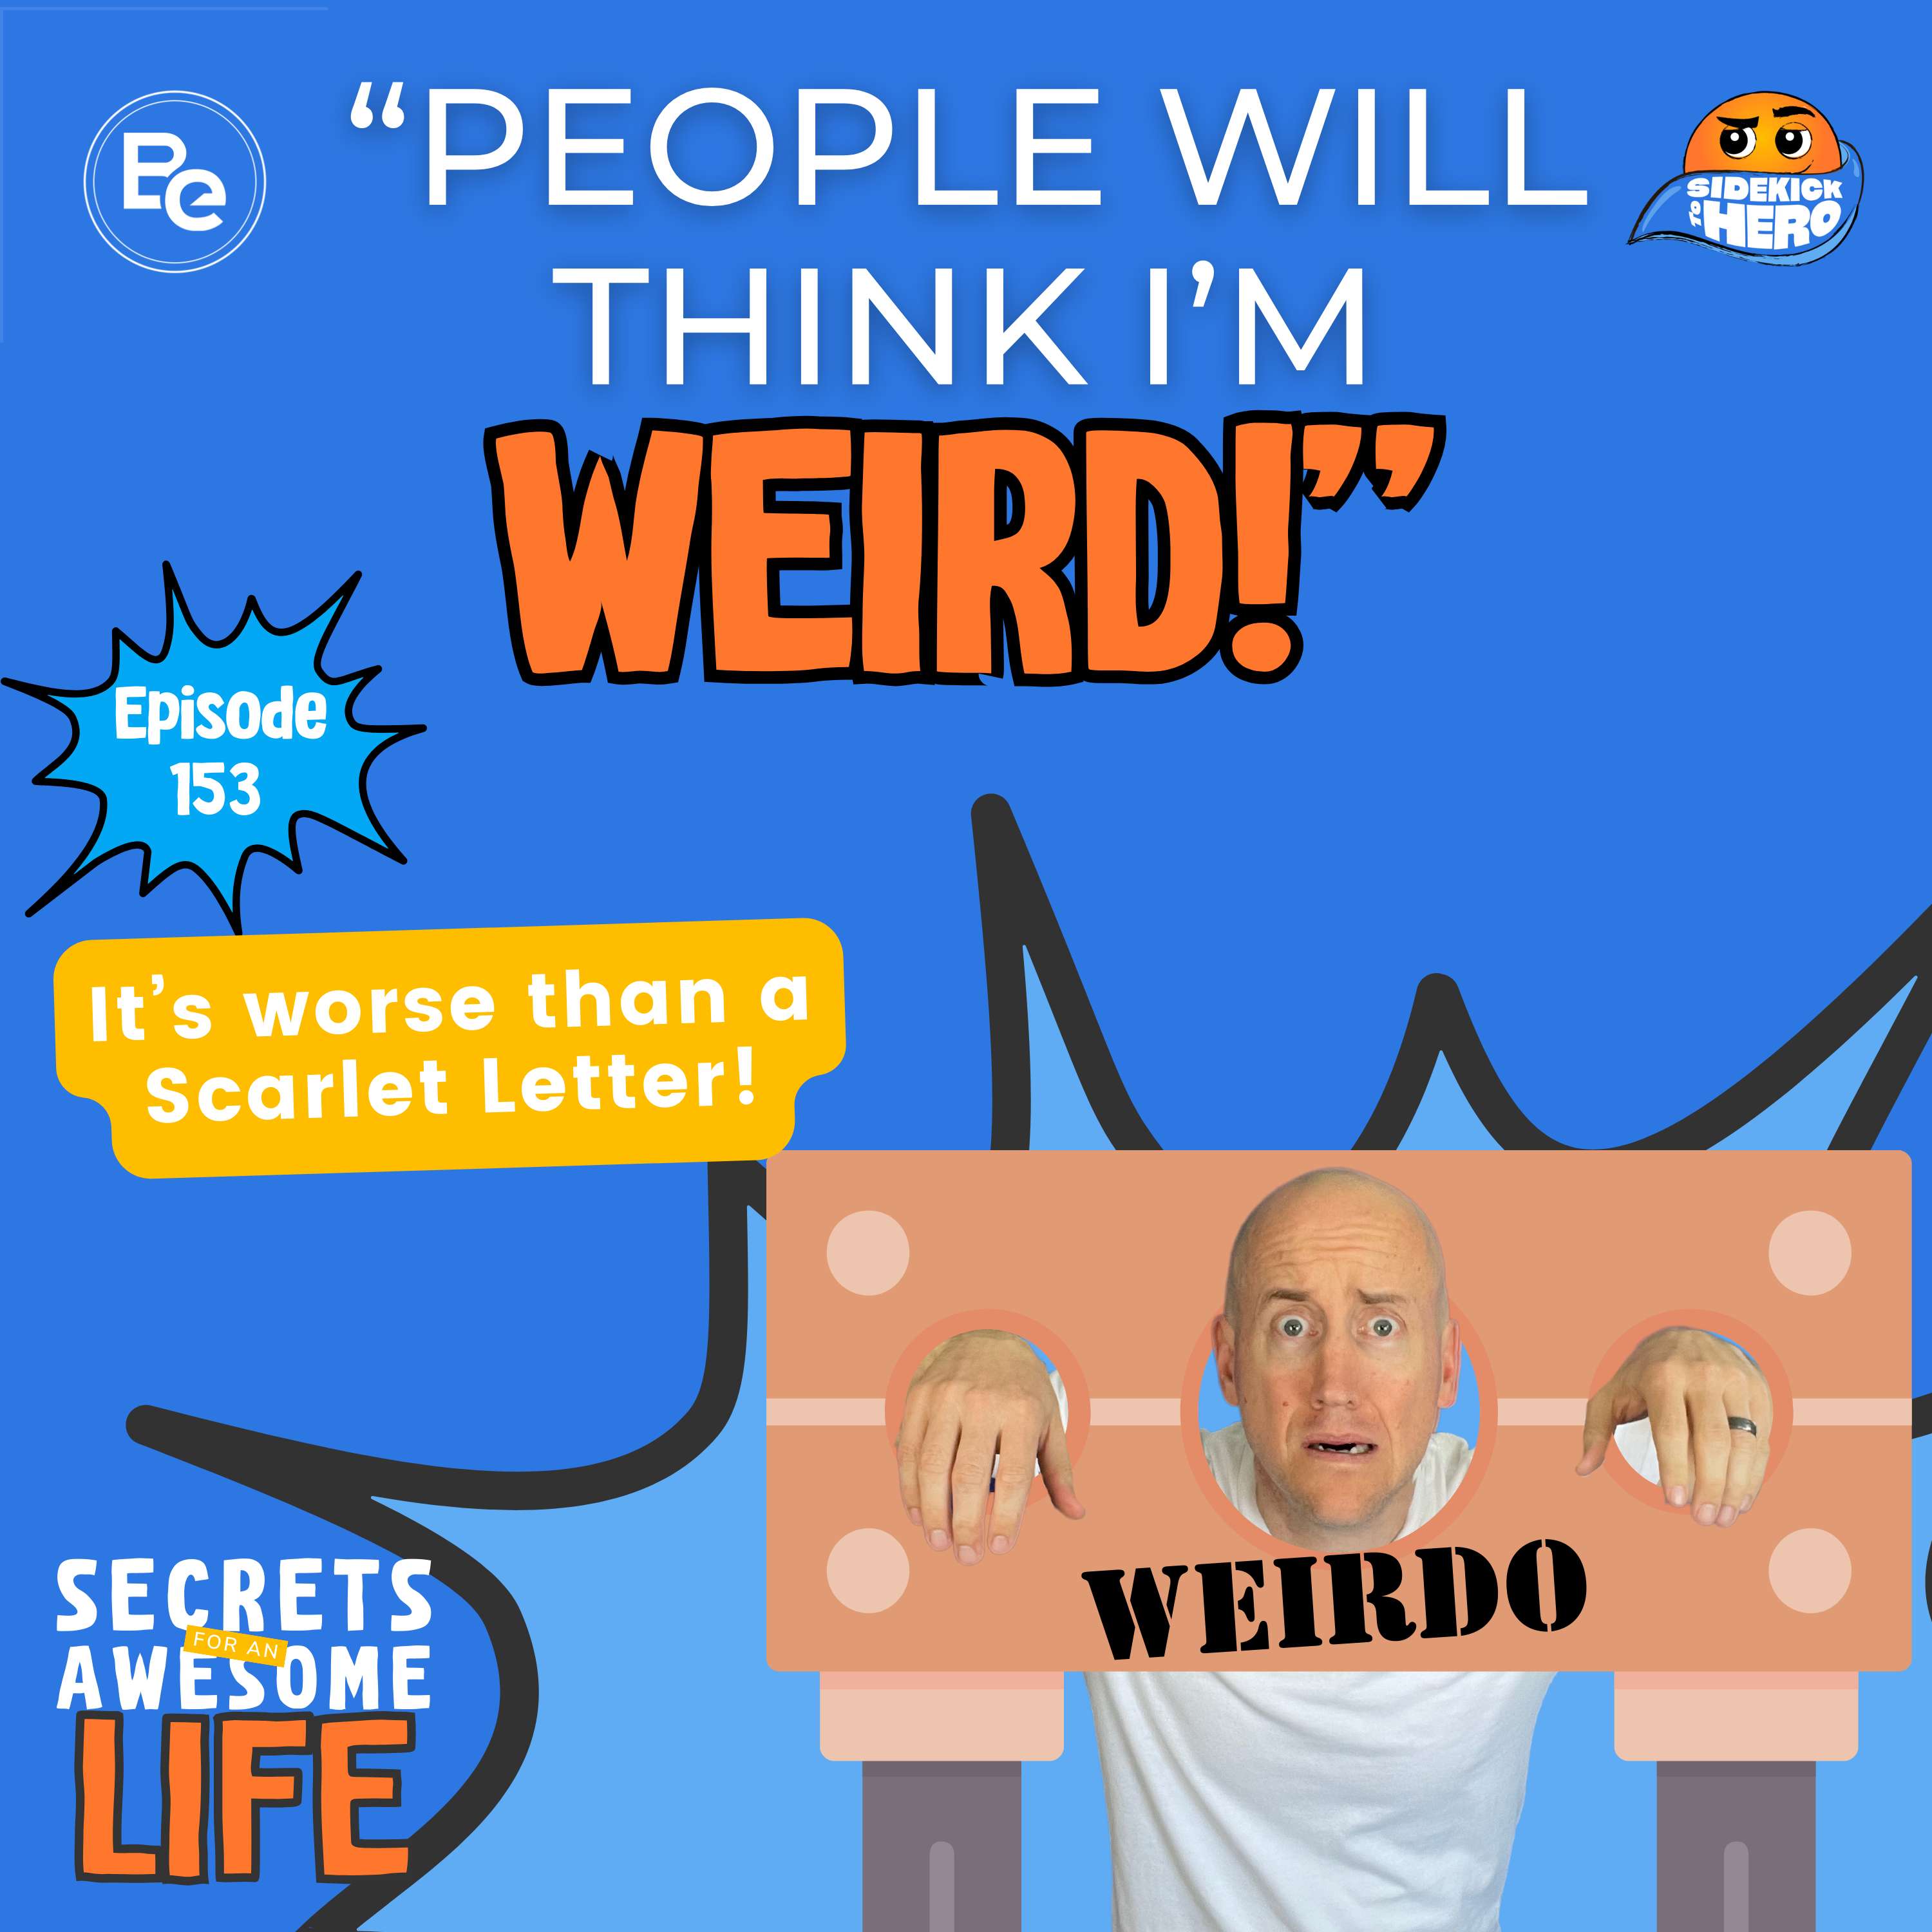 ”People Will Think I’m Weird!”